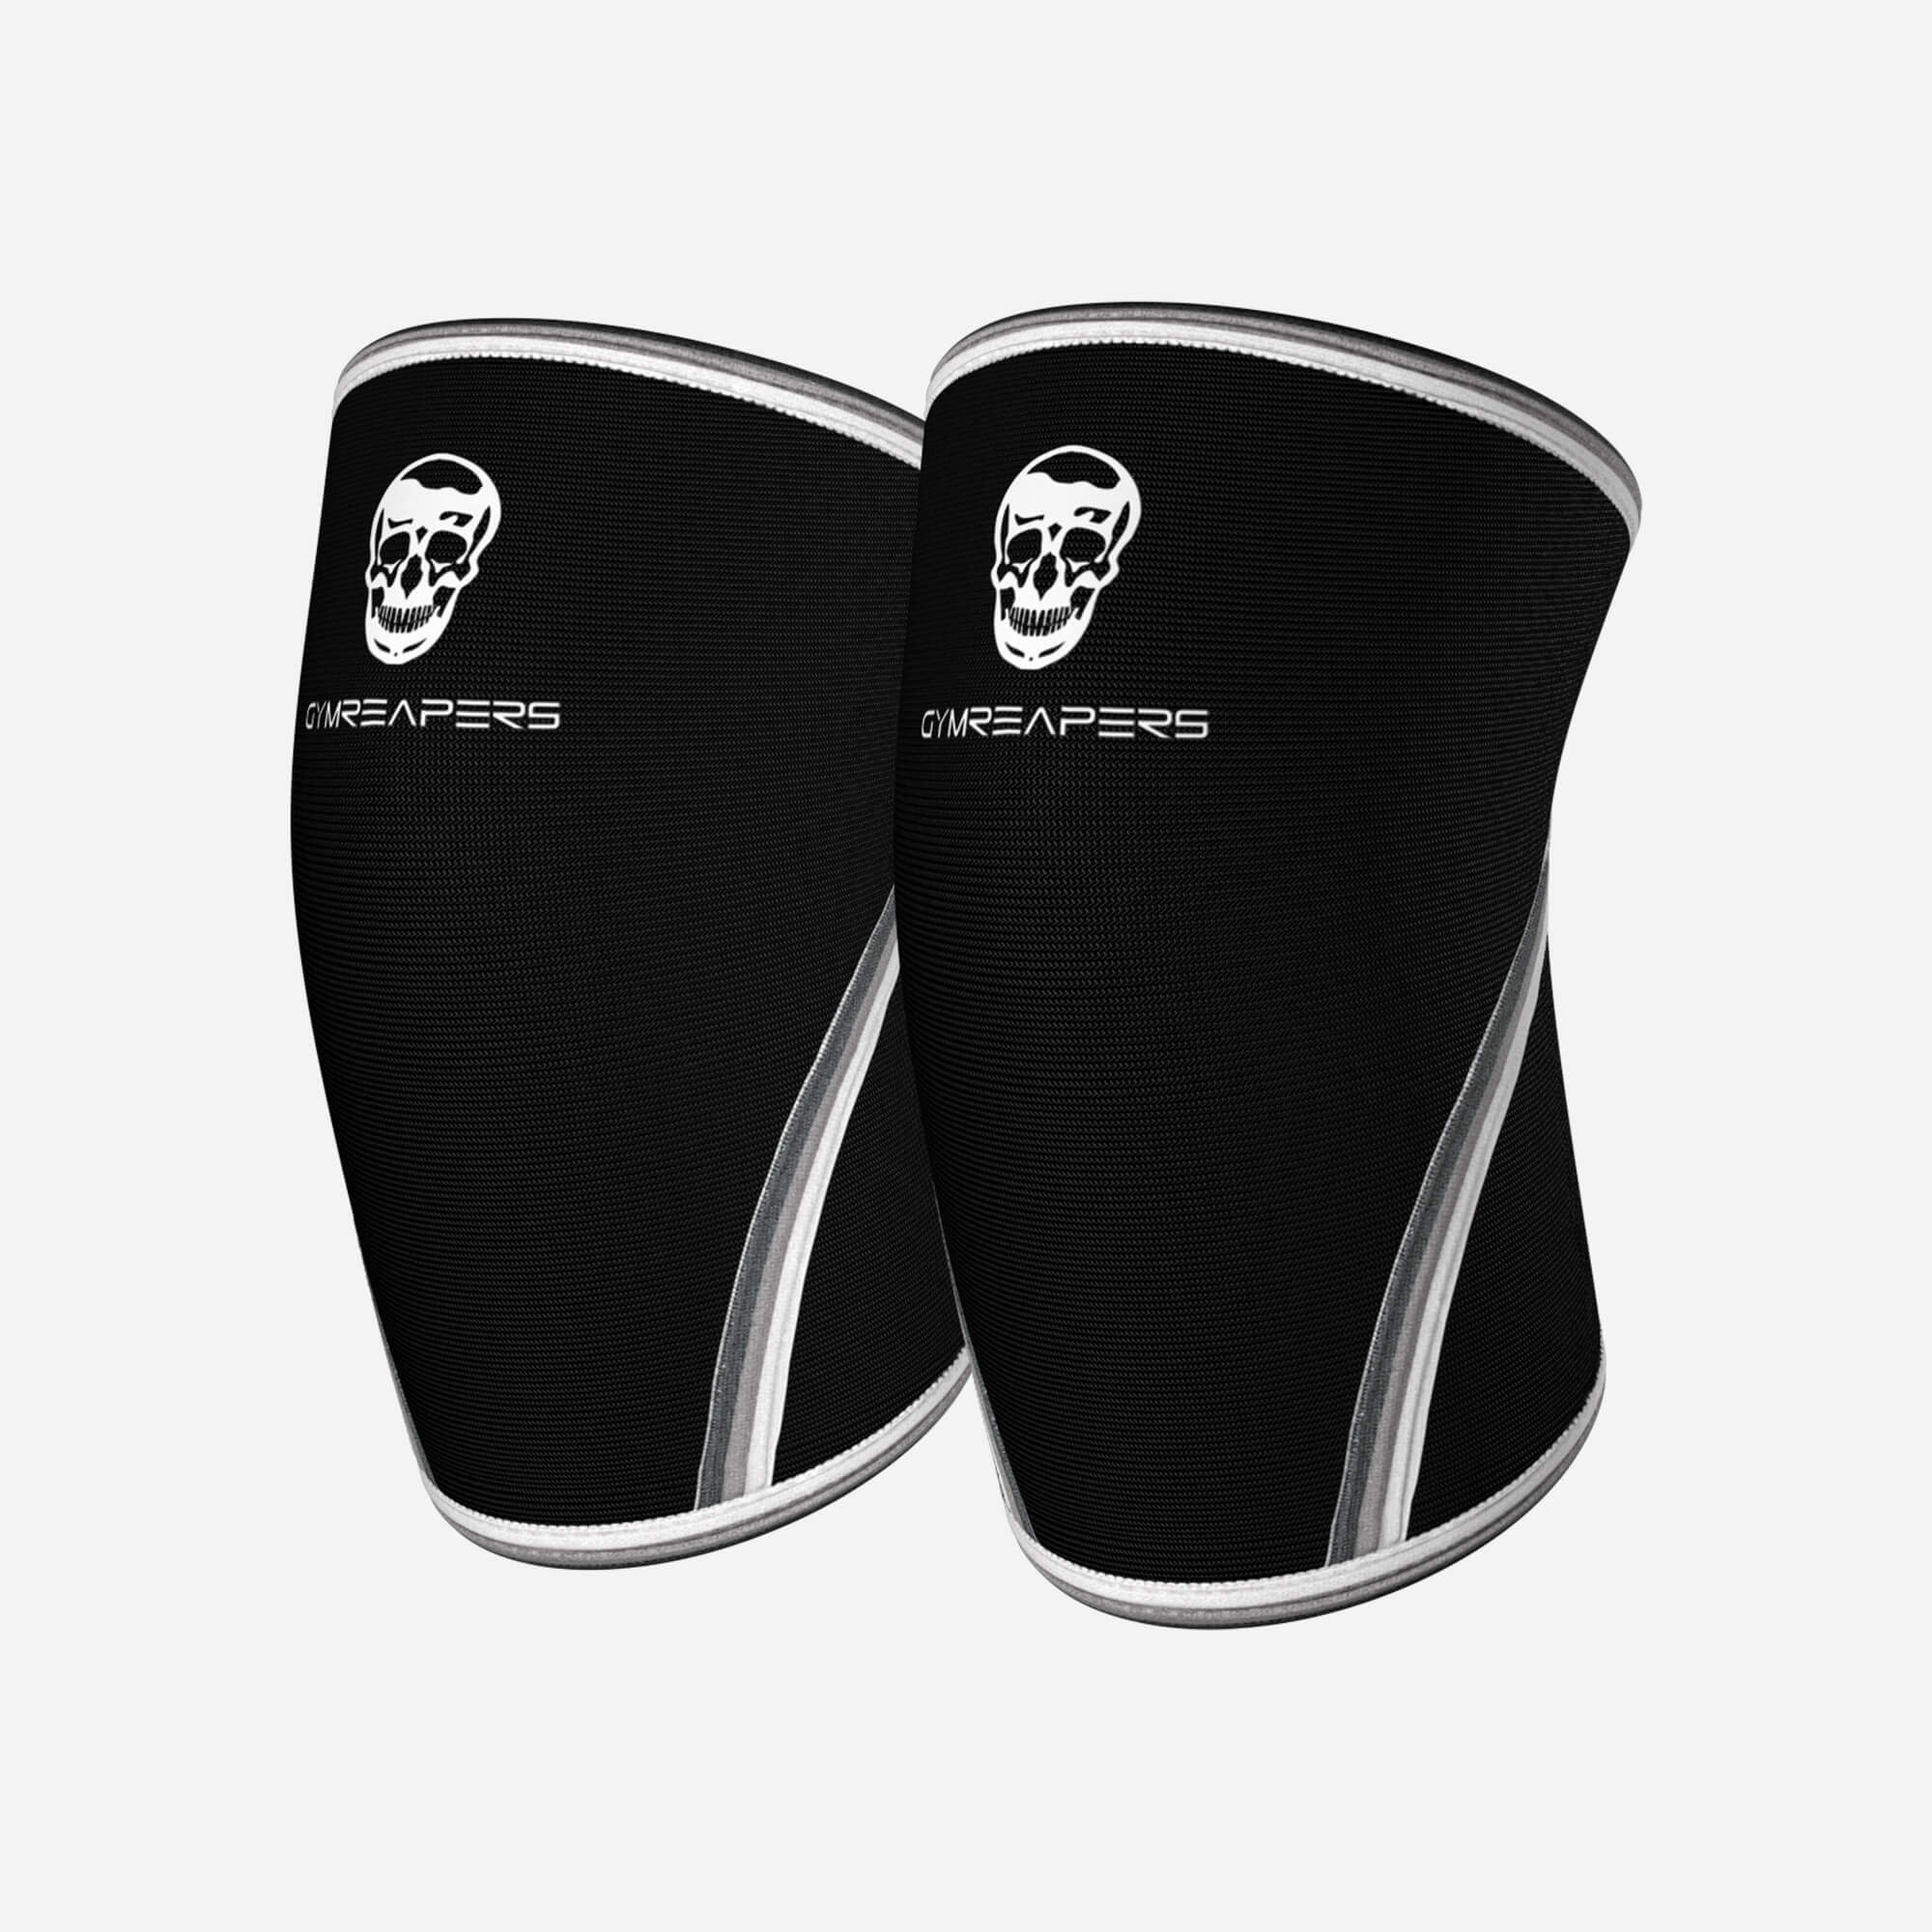 Gymreapers 7MM Knee Sleeves  Sleeves For Squats & Weightlifting